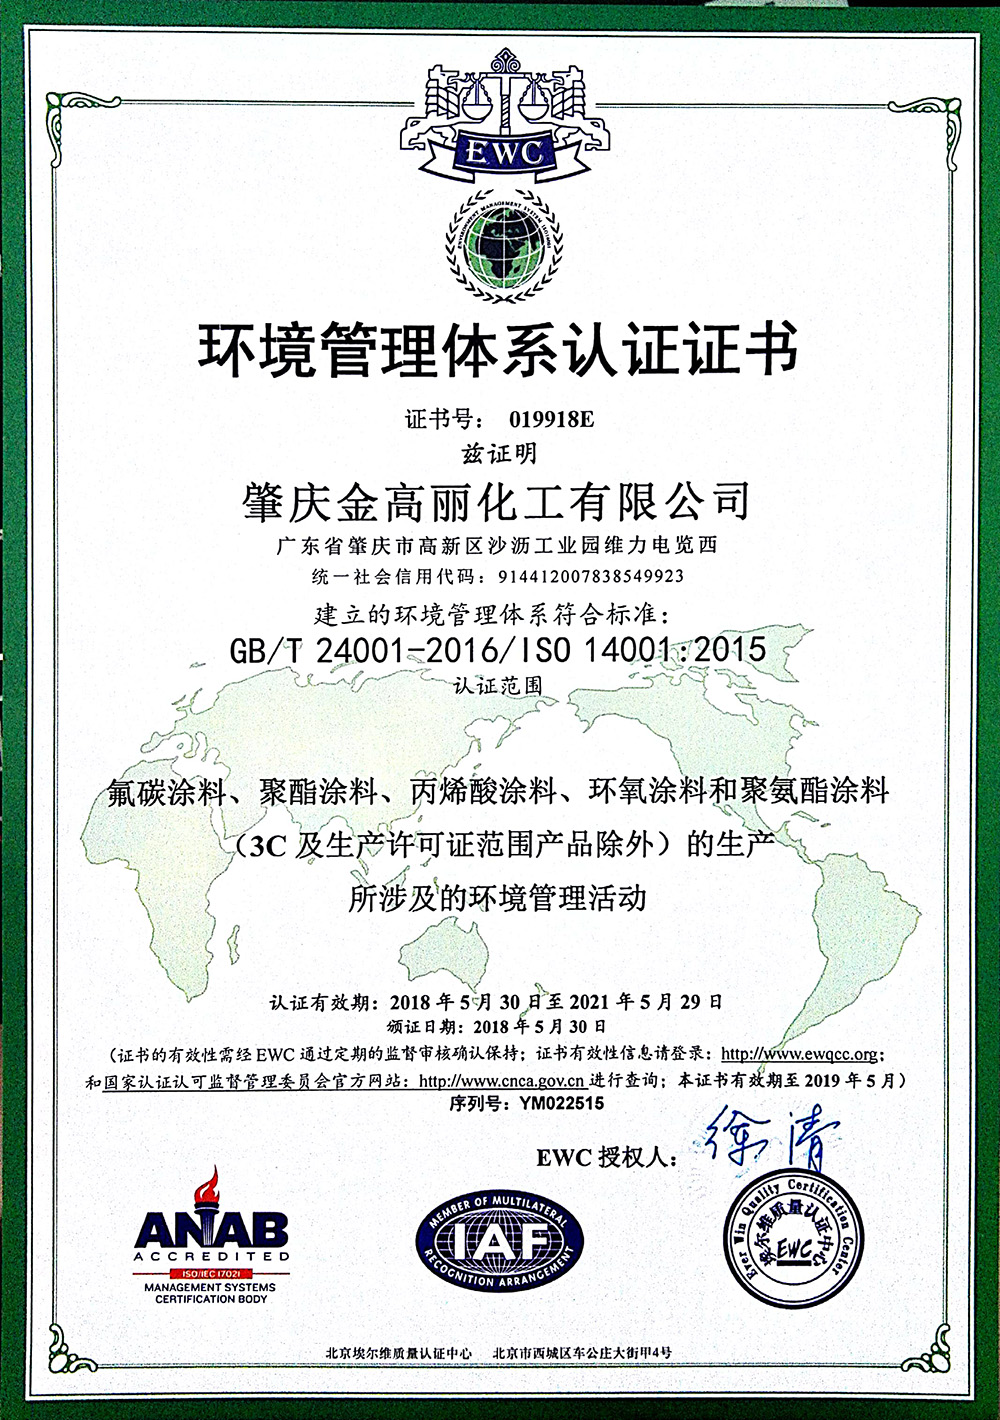 Zhaoqing KGE - Environmental Management System Certification (18-21)